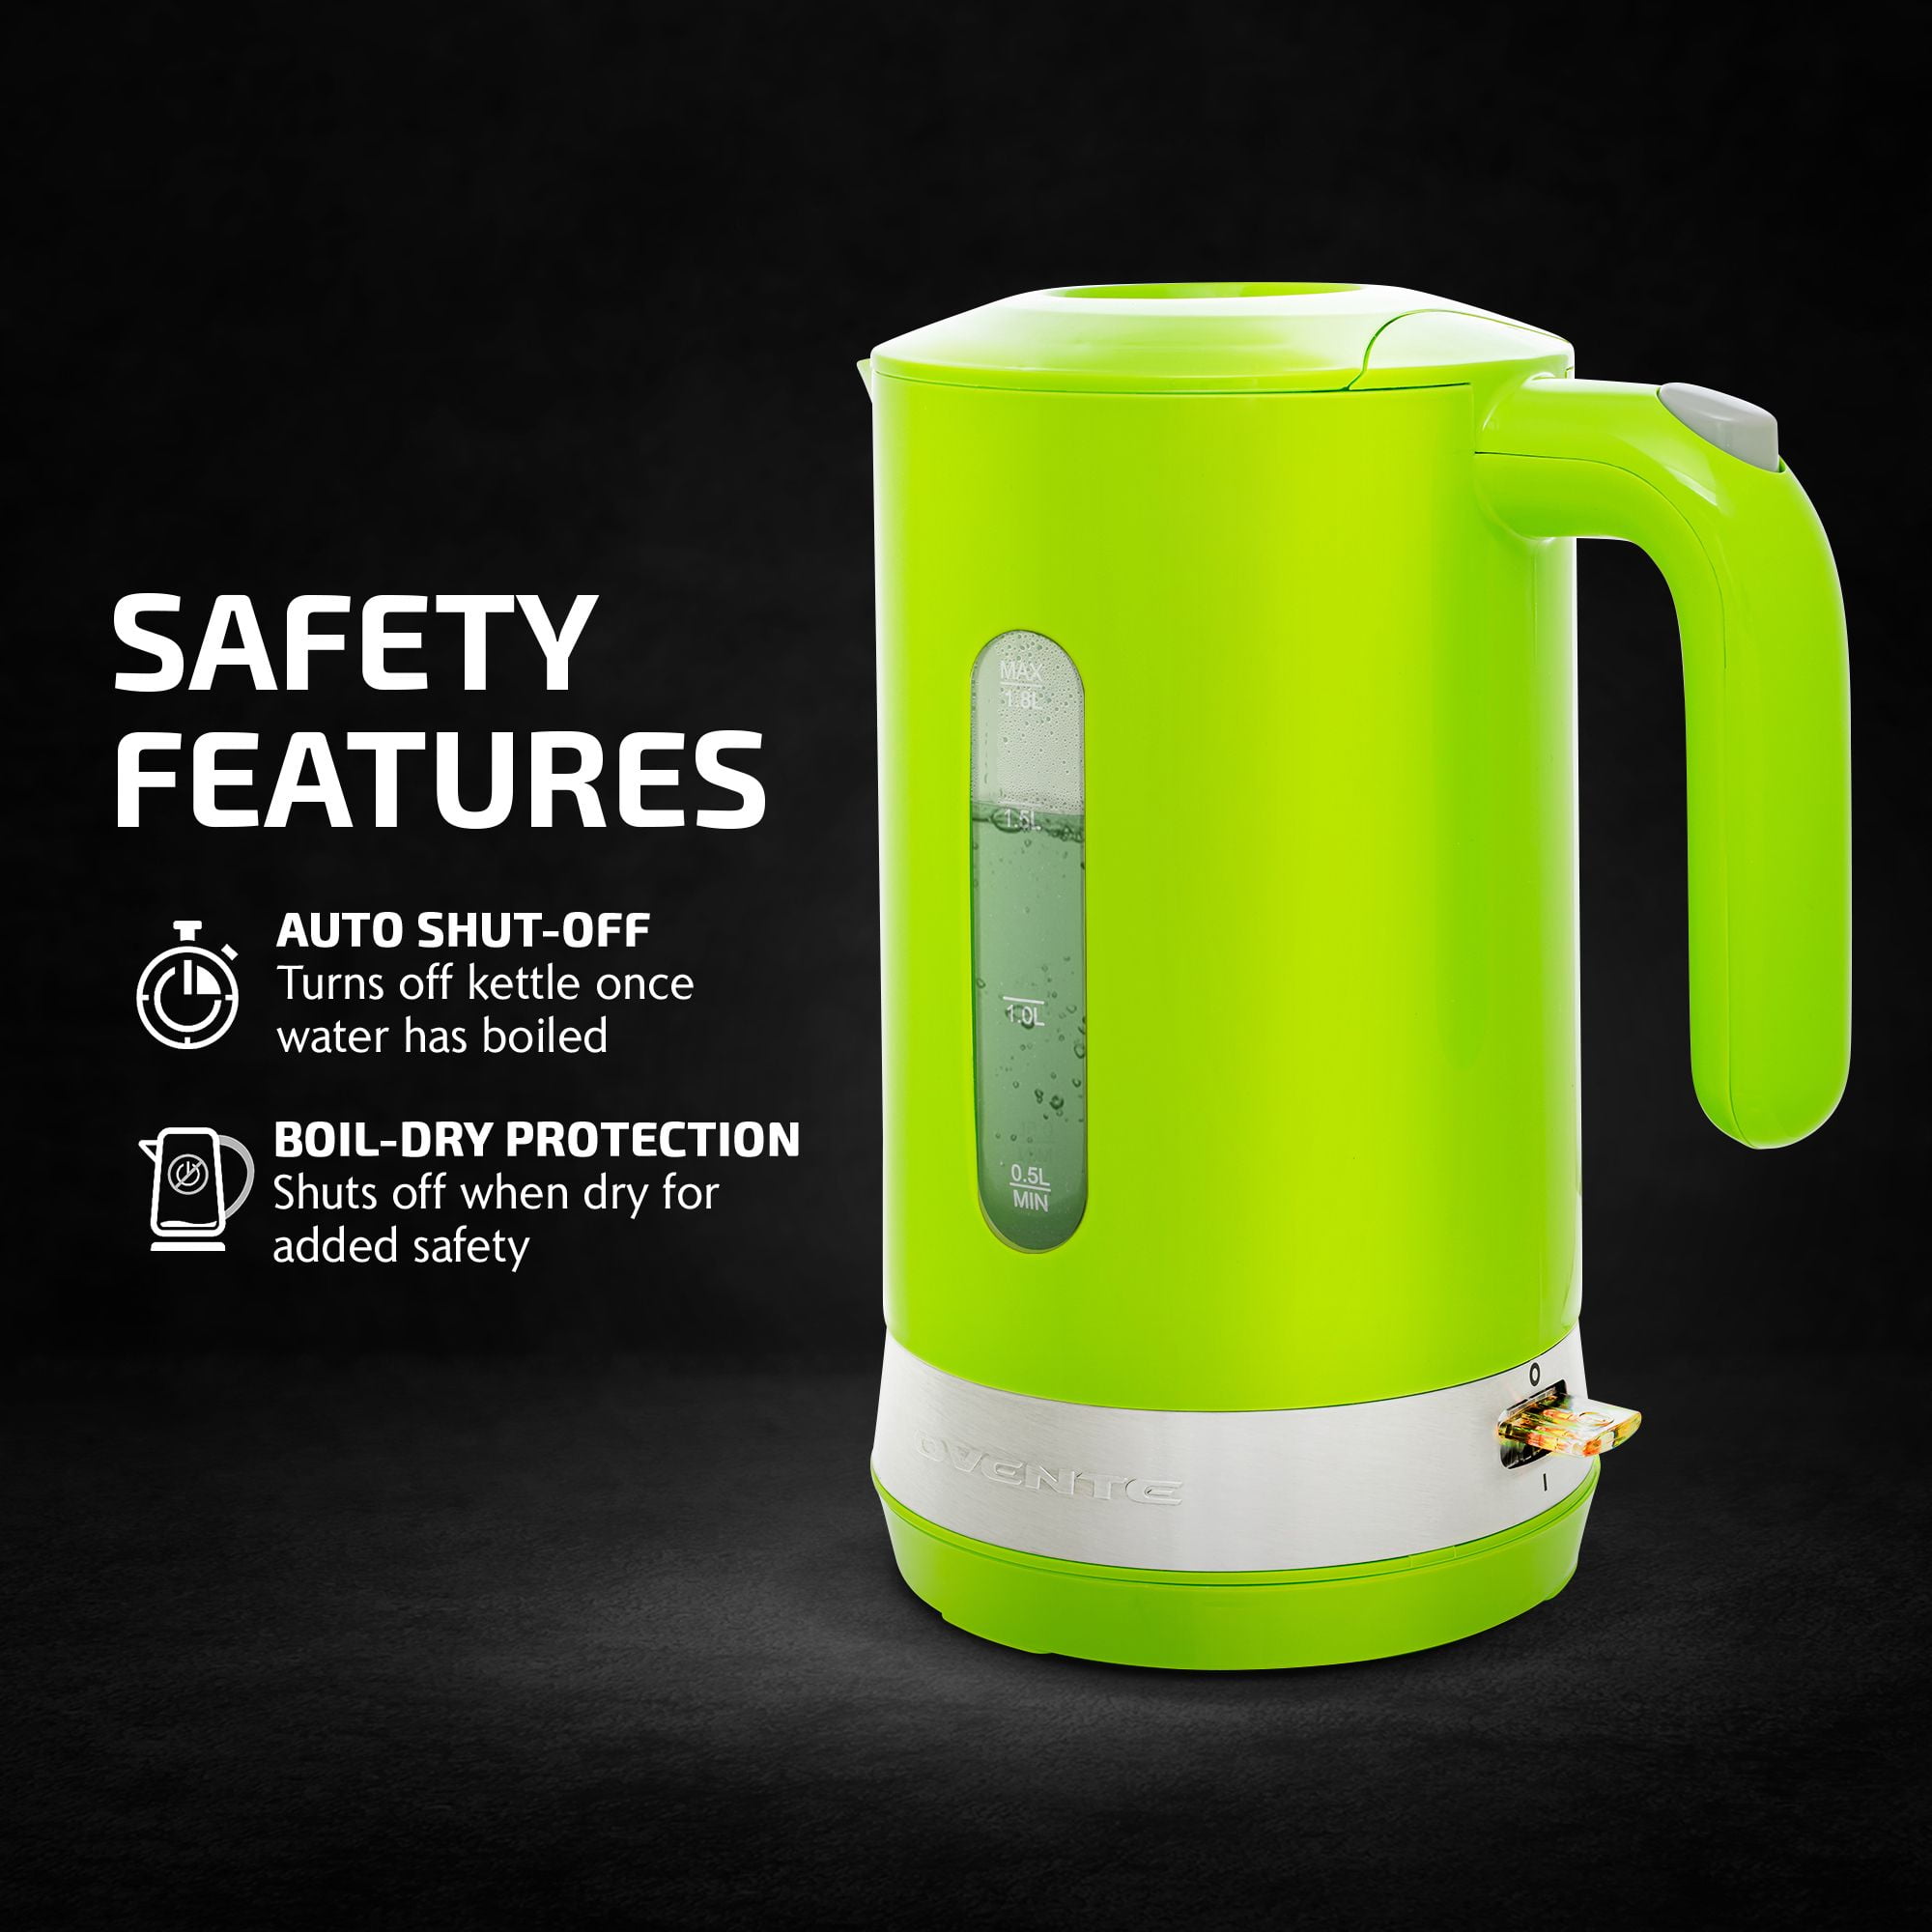 OVENTE Illuminated 6.5-Cup Green Electric Kettle with Filter, Fast Heating  and Auto-Shut Off KG83G - The Home Depot